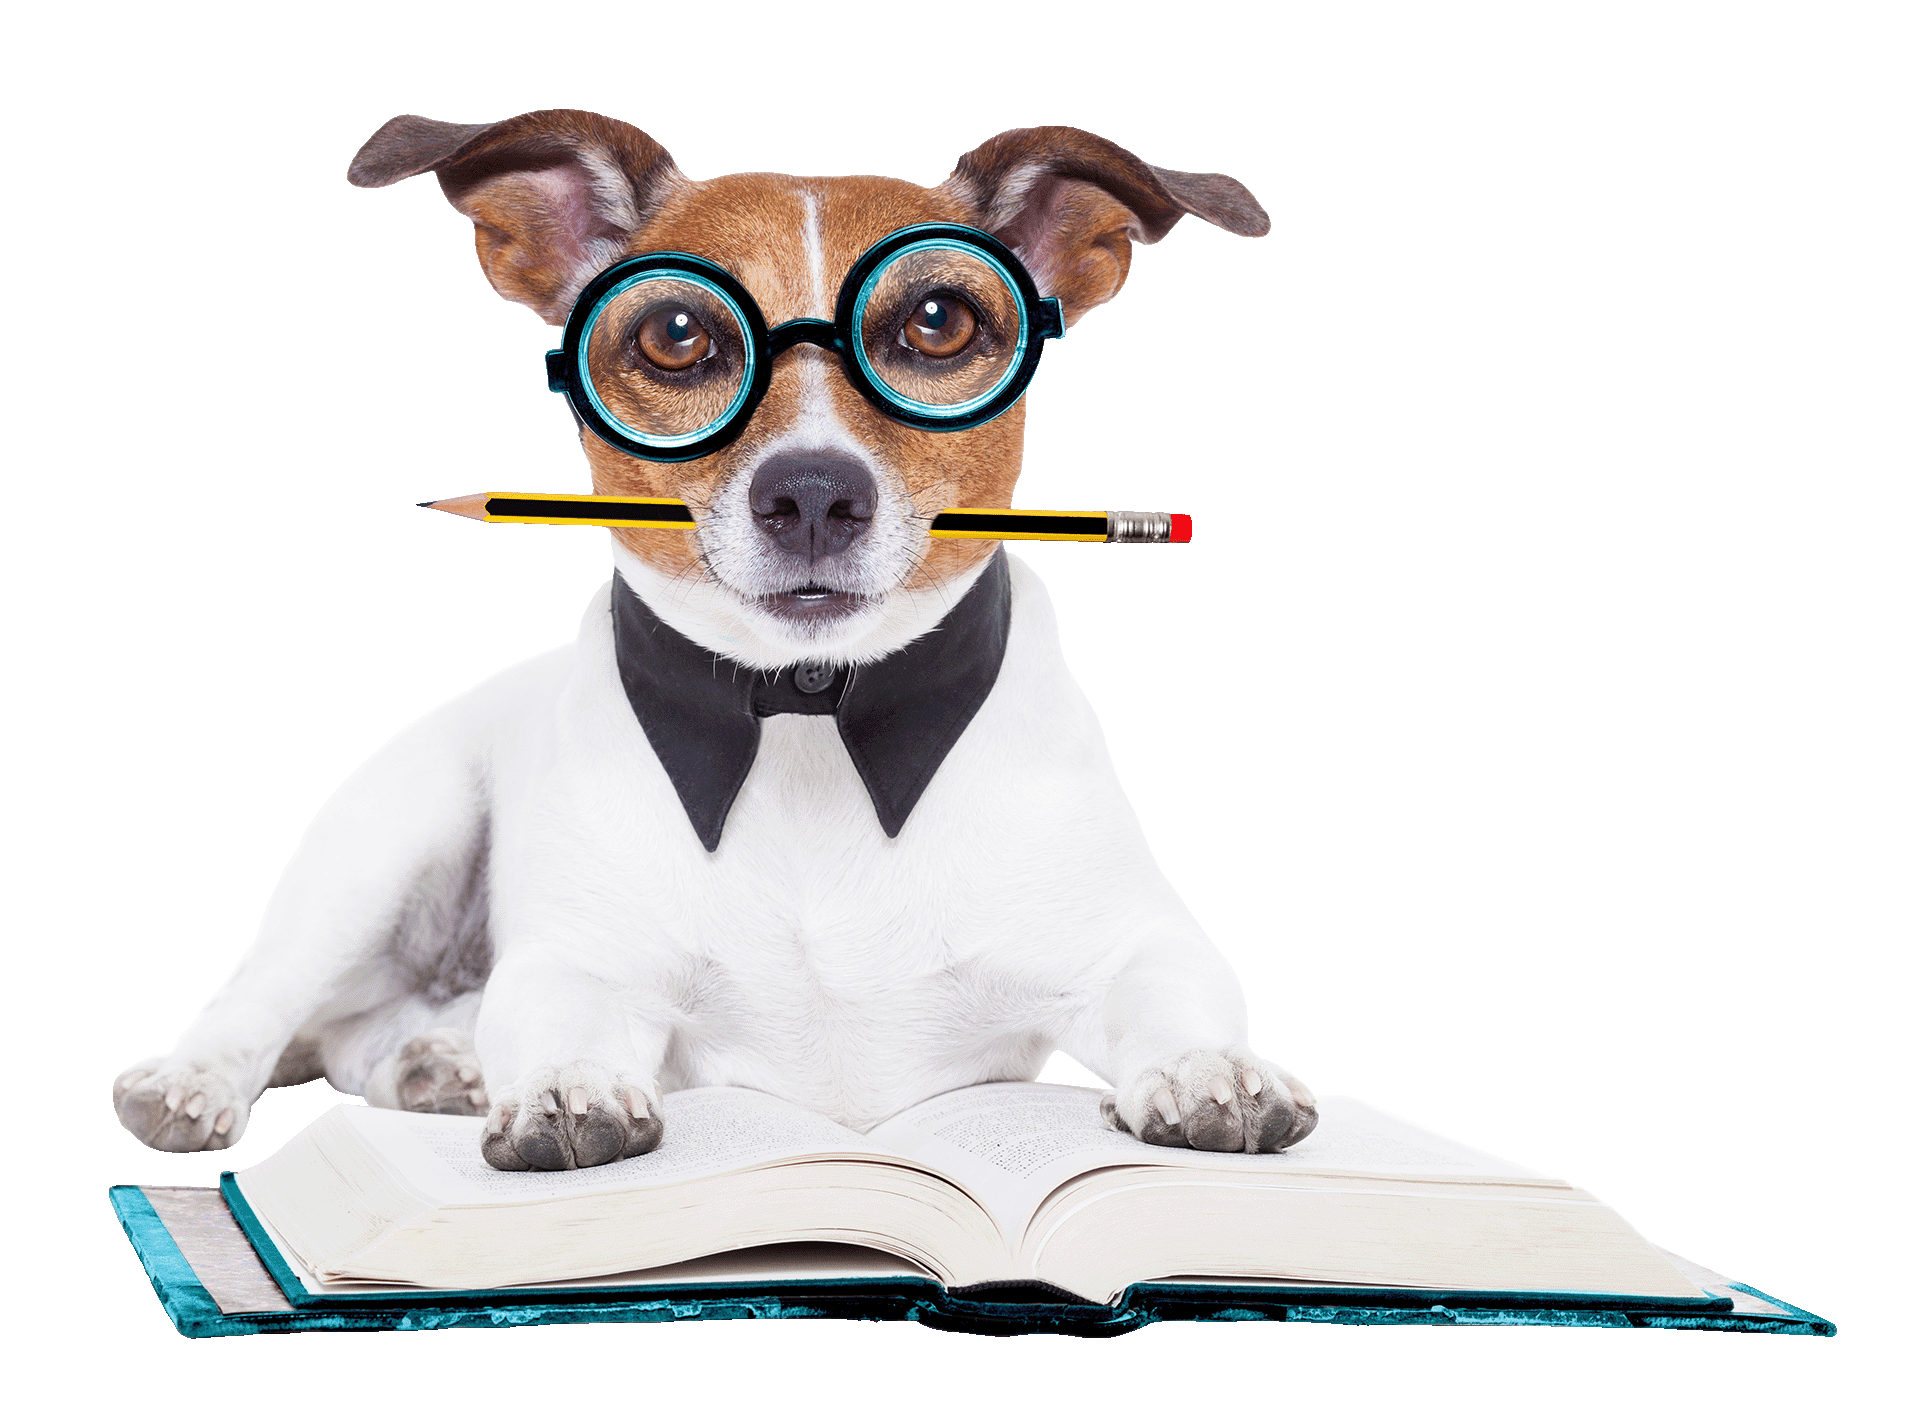 A small brown and white dog wearing large glasses holds a pencil in its mouth. It's lying on a large open book with a turquoise cover.